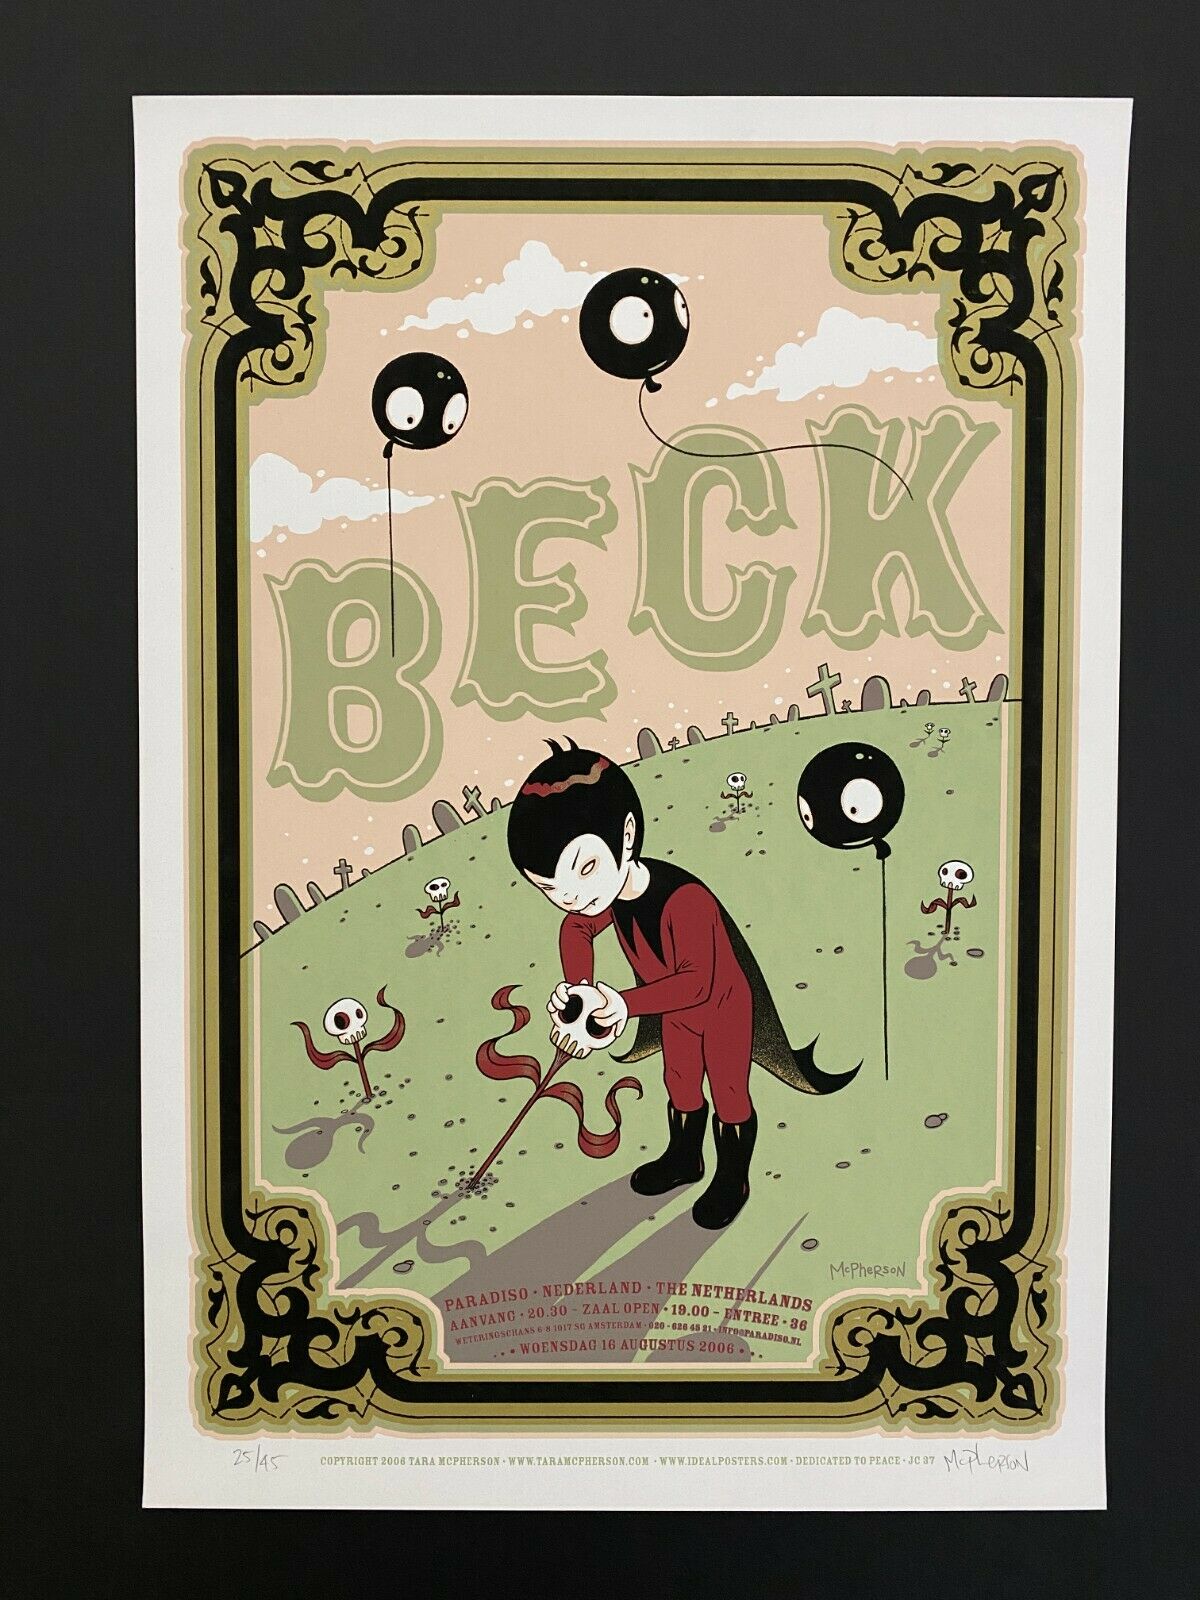 Rare! 2006 Beck Silkscreen Poster —green Variant— Signed & Numbered By Mcpherson